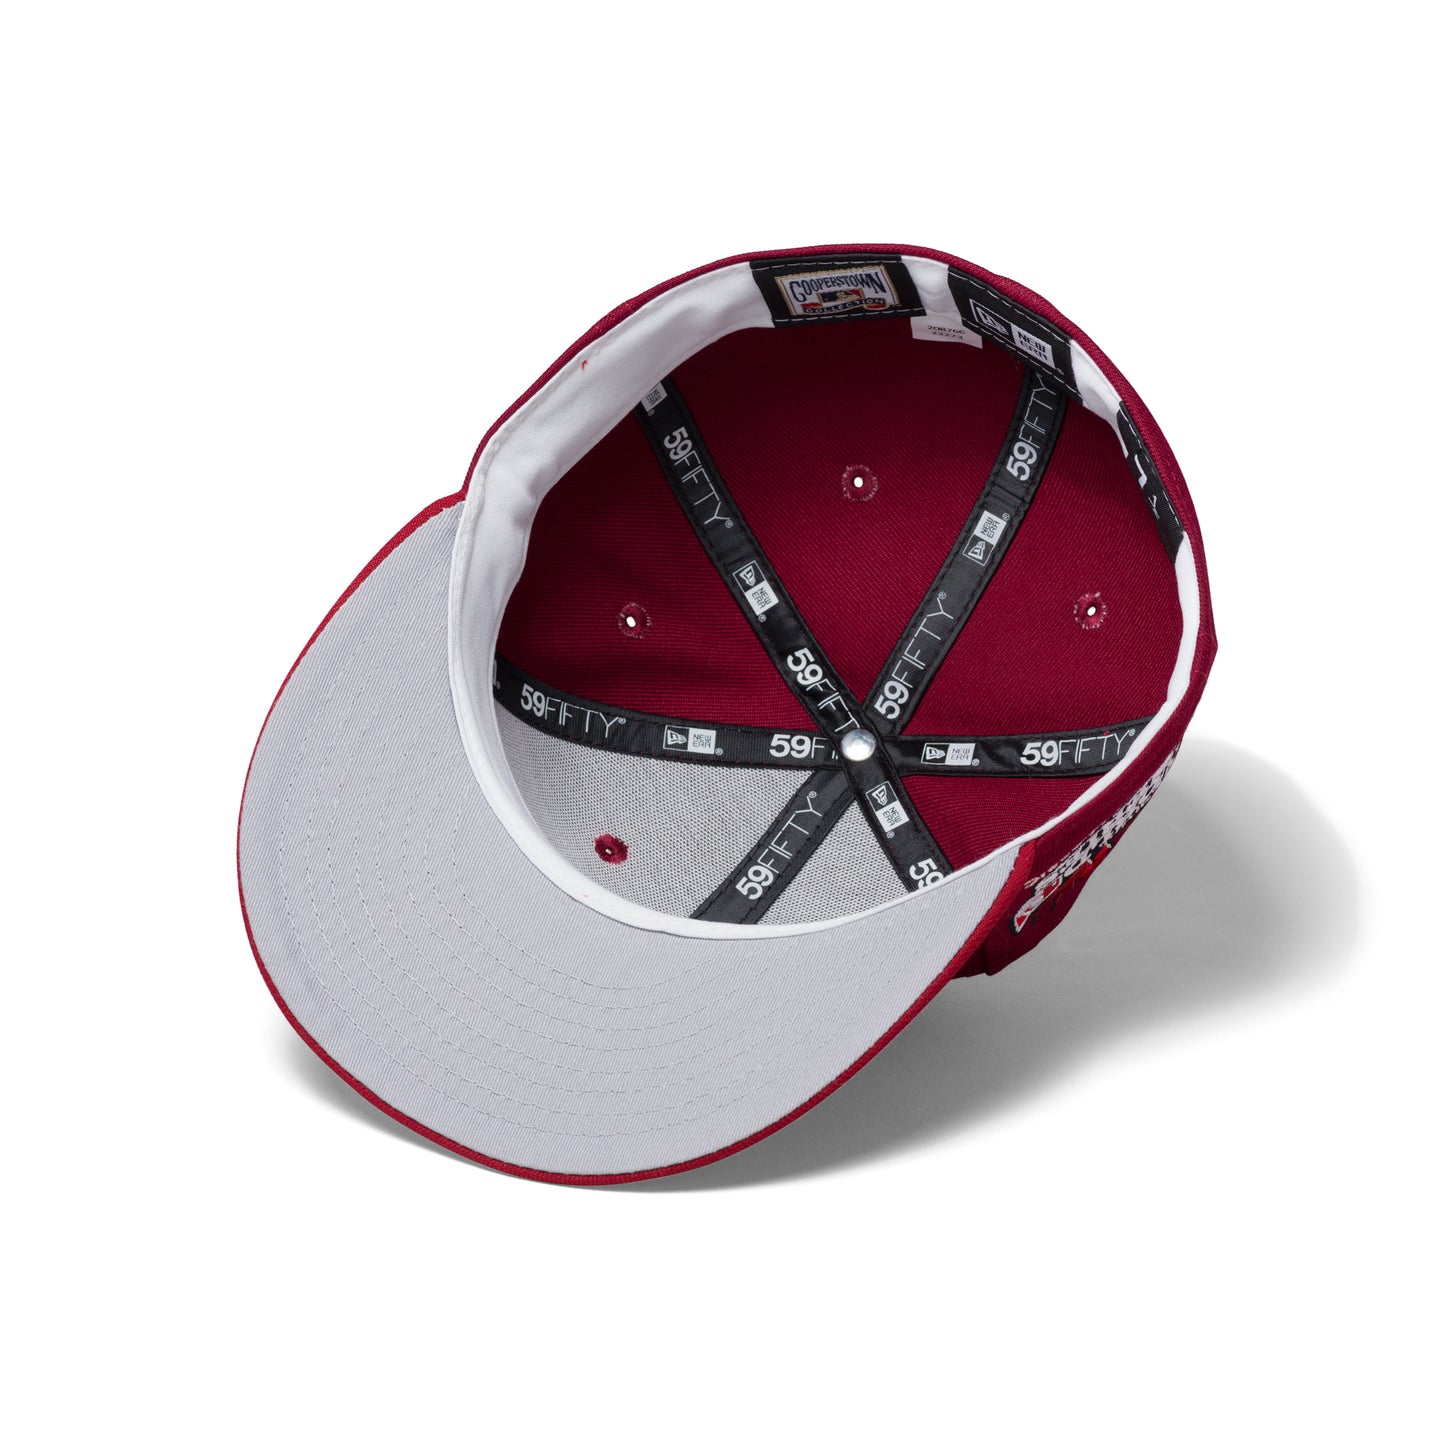 Concepts x New Era 59FIFTY Boston Red Sox 2013 World Series Fitted Hat (Red) 7 1/8